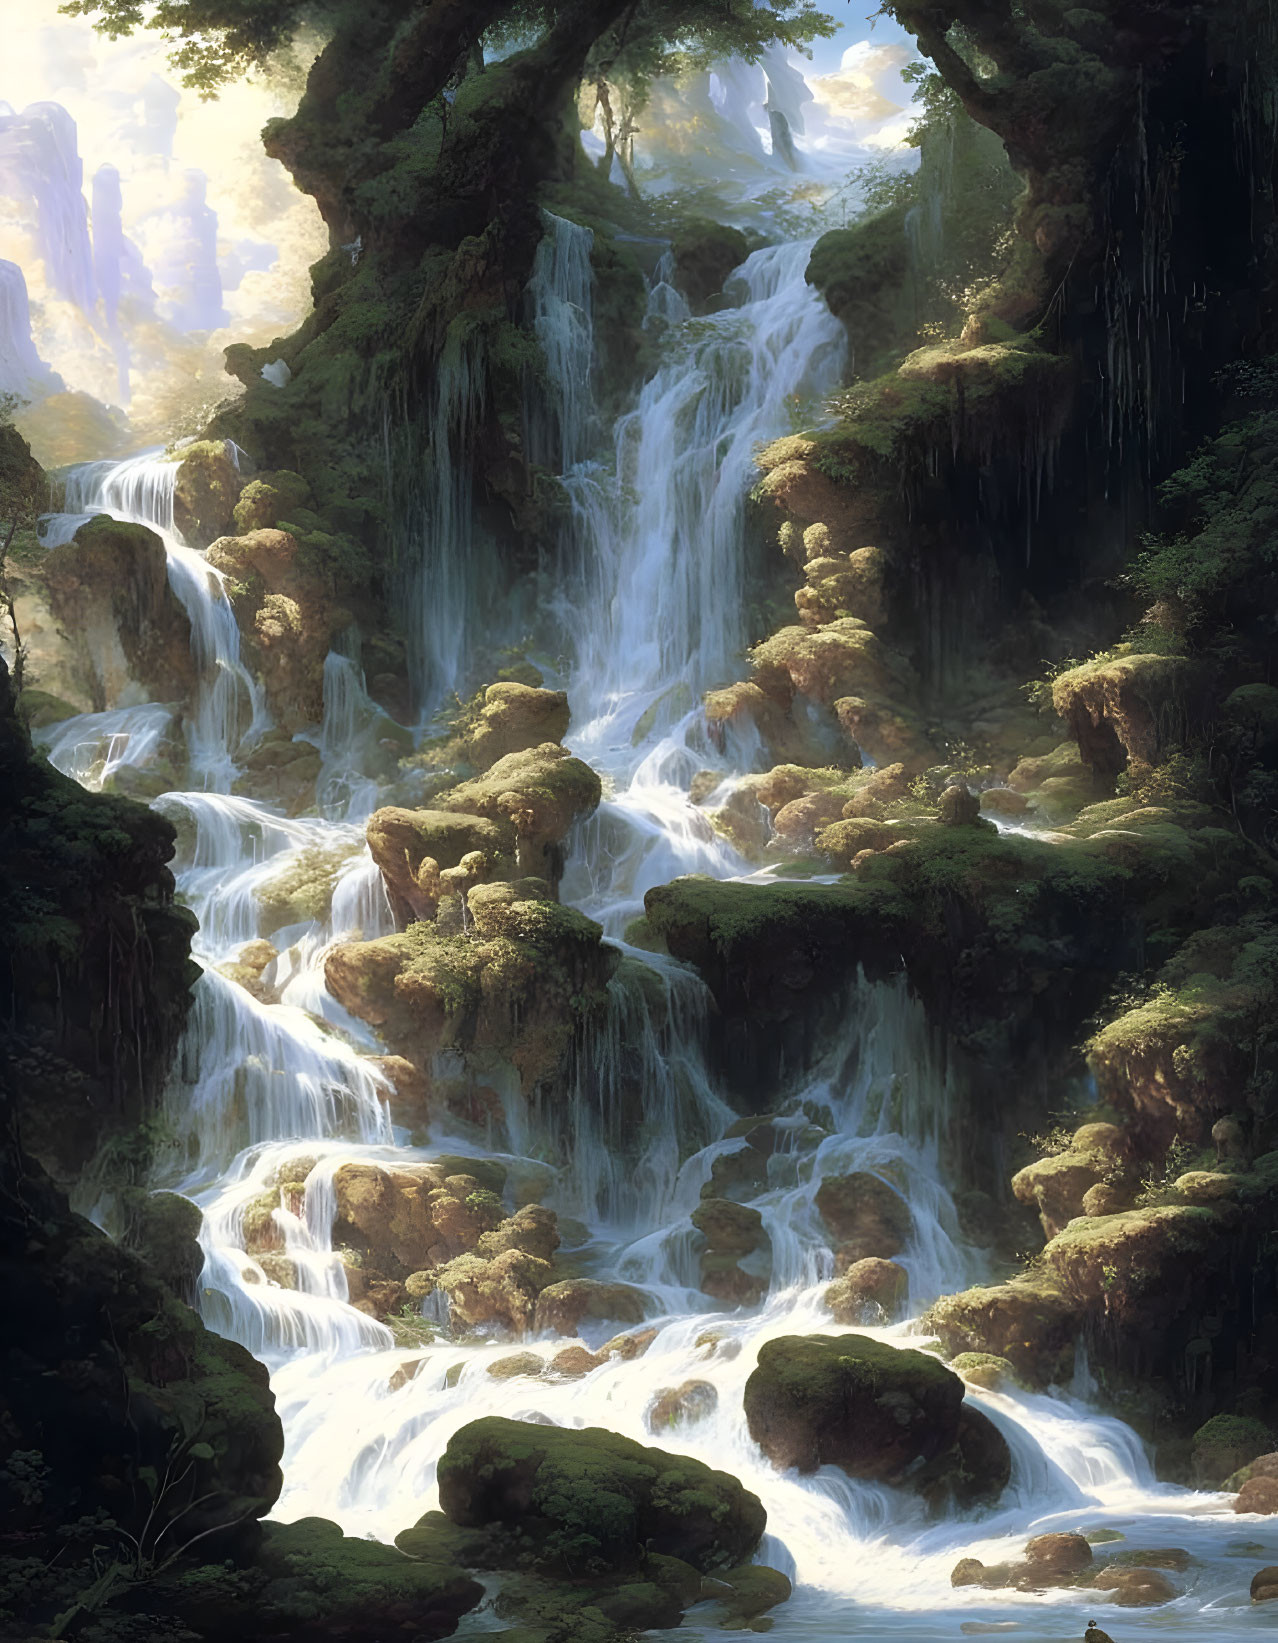 Tranquil waterfalls in mossy rocks amid misty forest